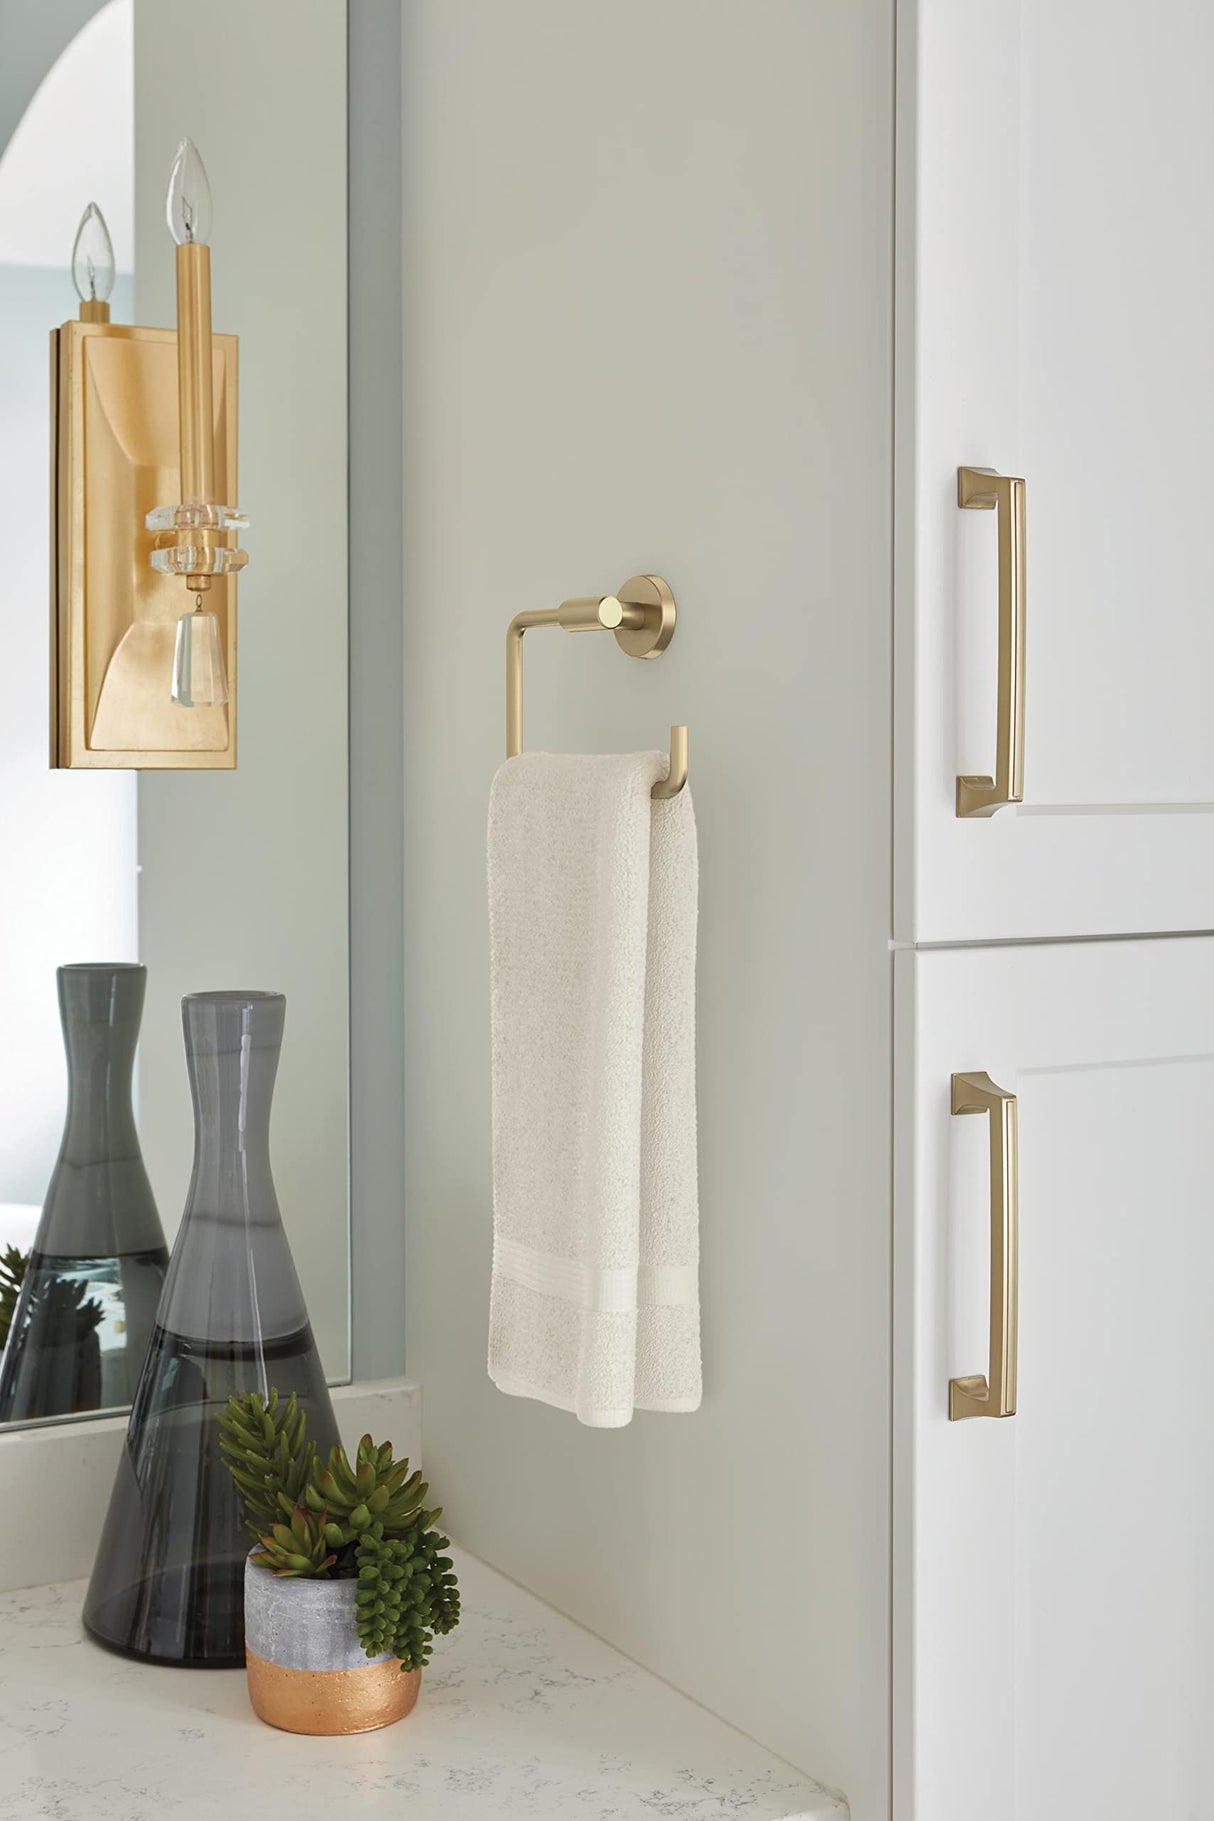 Amerock BH26541BBZ Golden Champagne Towel Ring 6-7/16 in (164 mm) Length Towel Holder Arrondi Hand Towel Holder for Bathroom Wall Small Kitchen Towel Holder Bath Accessories